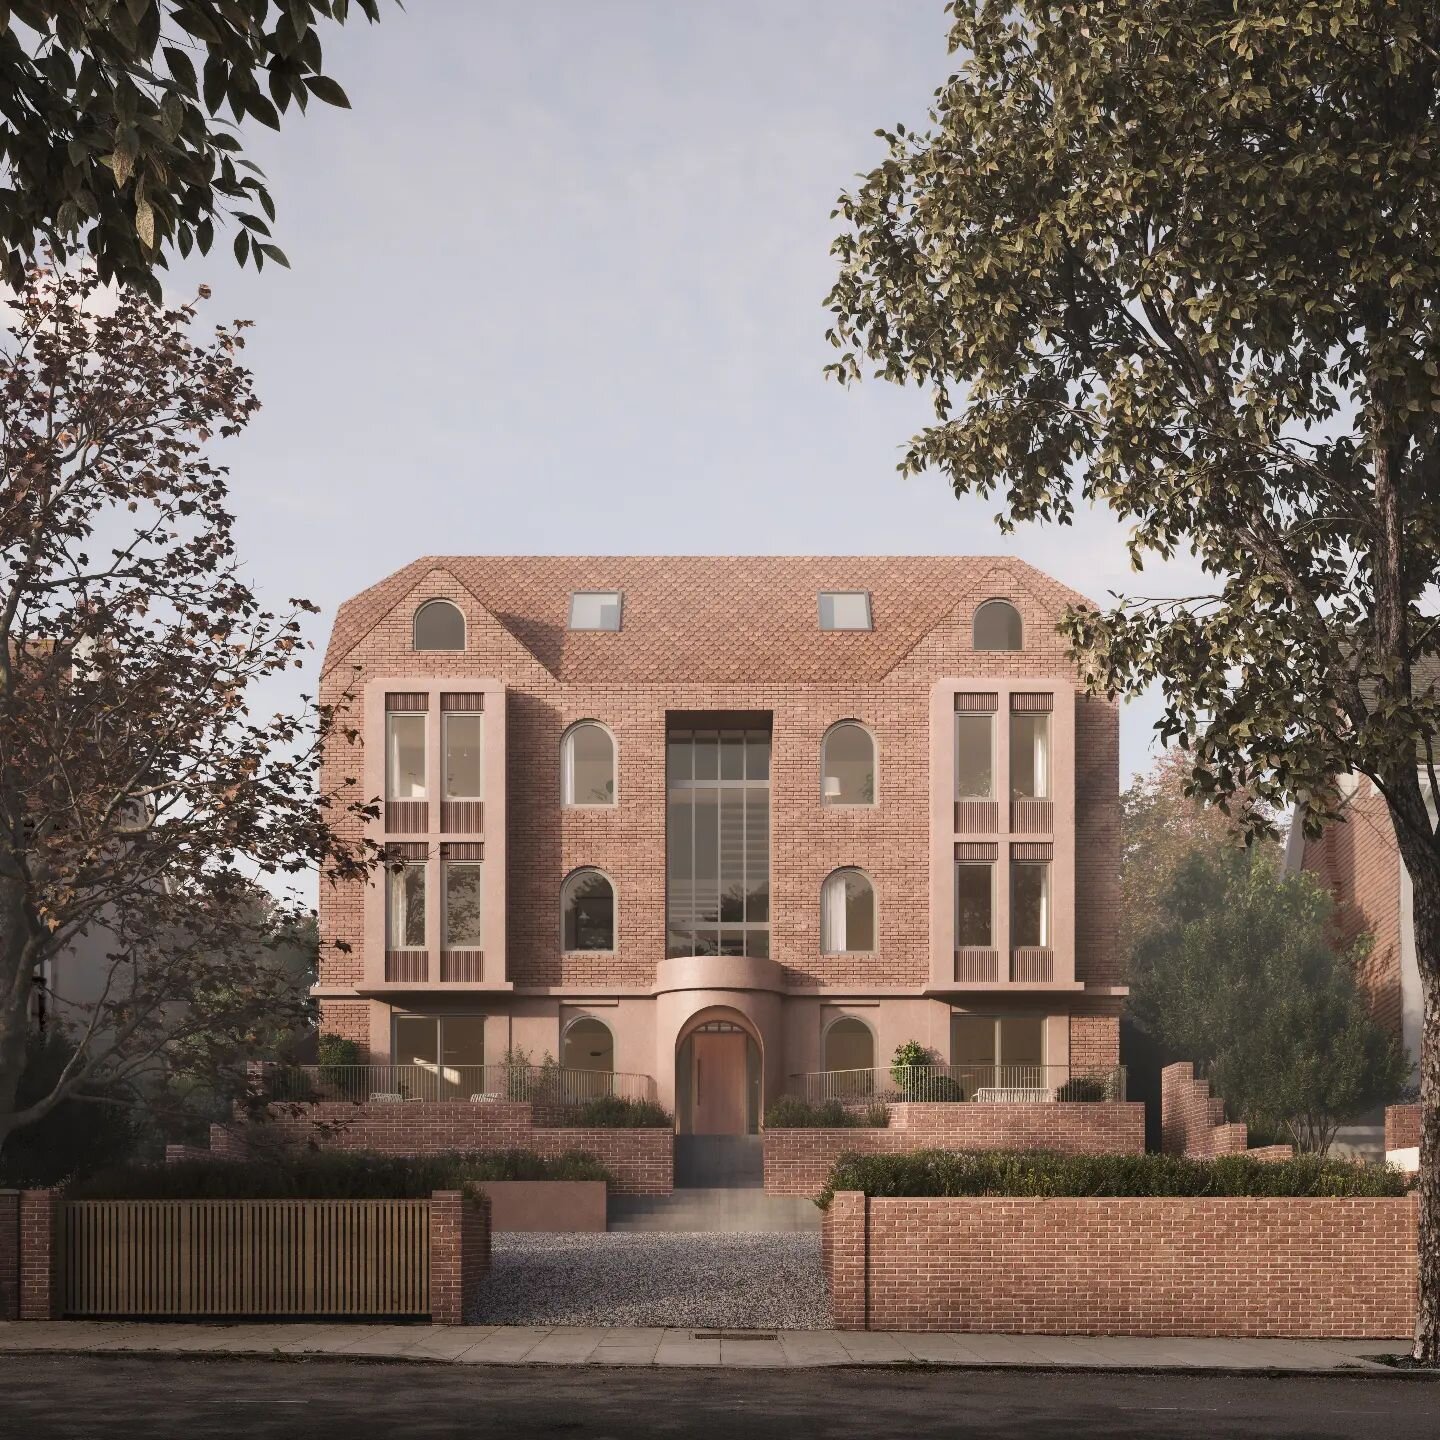 Bringing a modern twist to Croydon's classic bay design - we're excited to share our proposal for 9 new build flats with unique arched designs, an interpretation of the traditional bay windows.  We sure do love an arch!

📷 By @oflightstudio 

#tradi